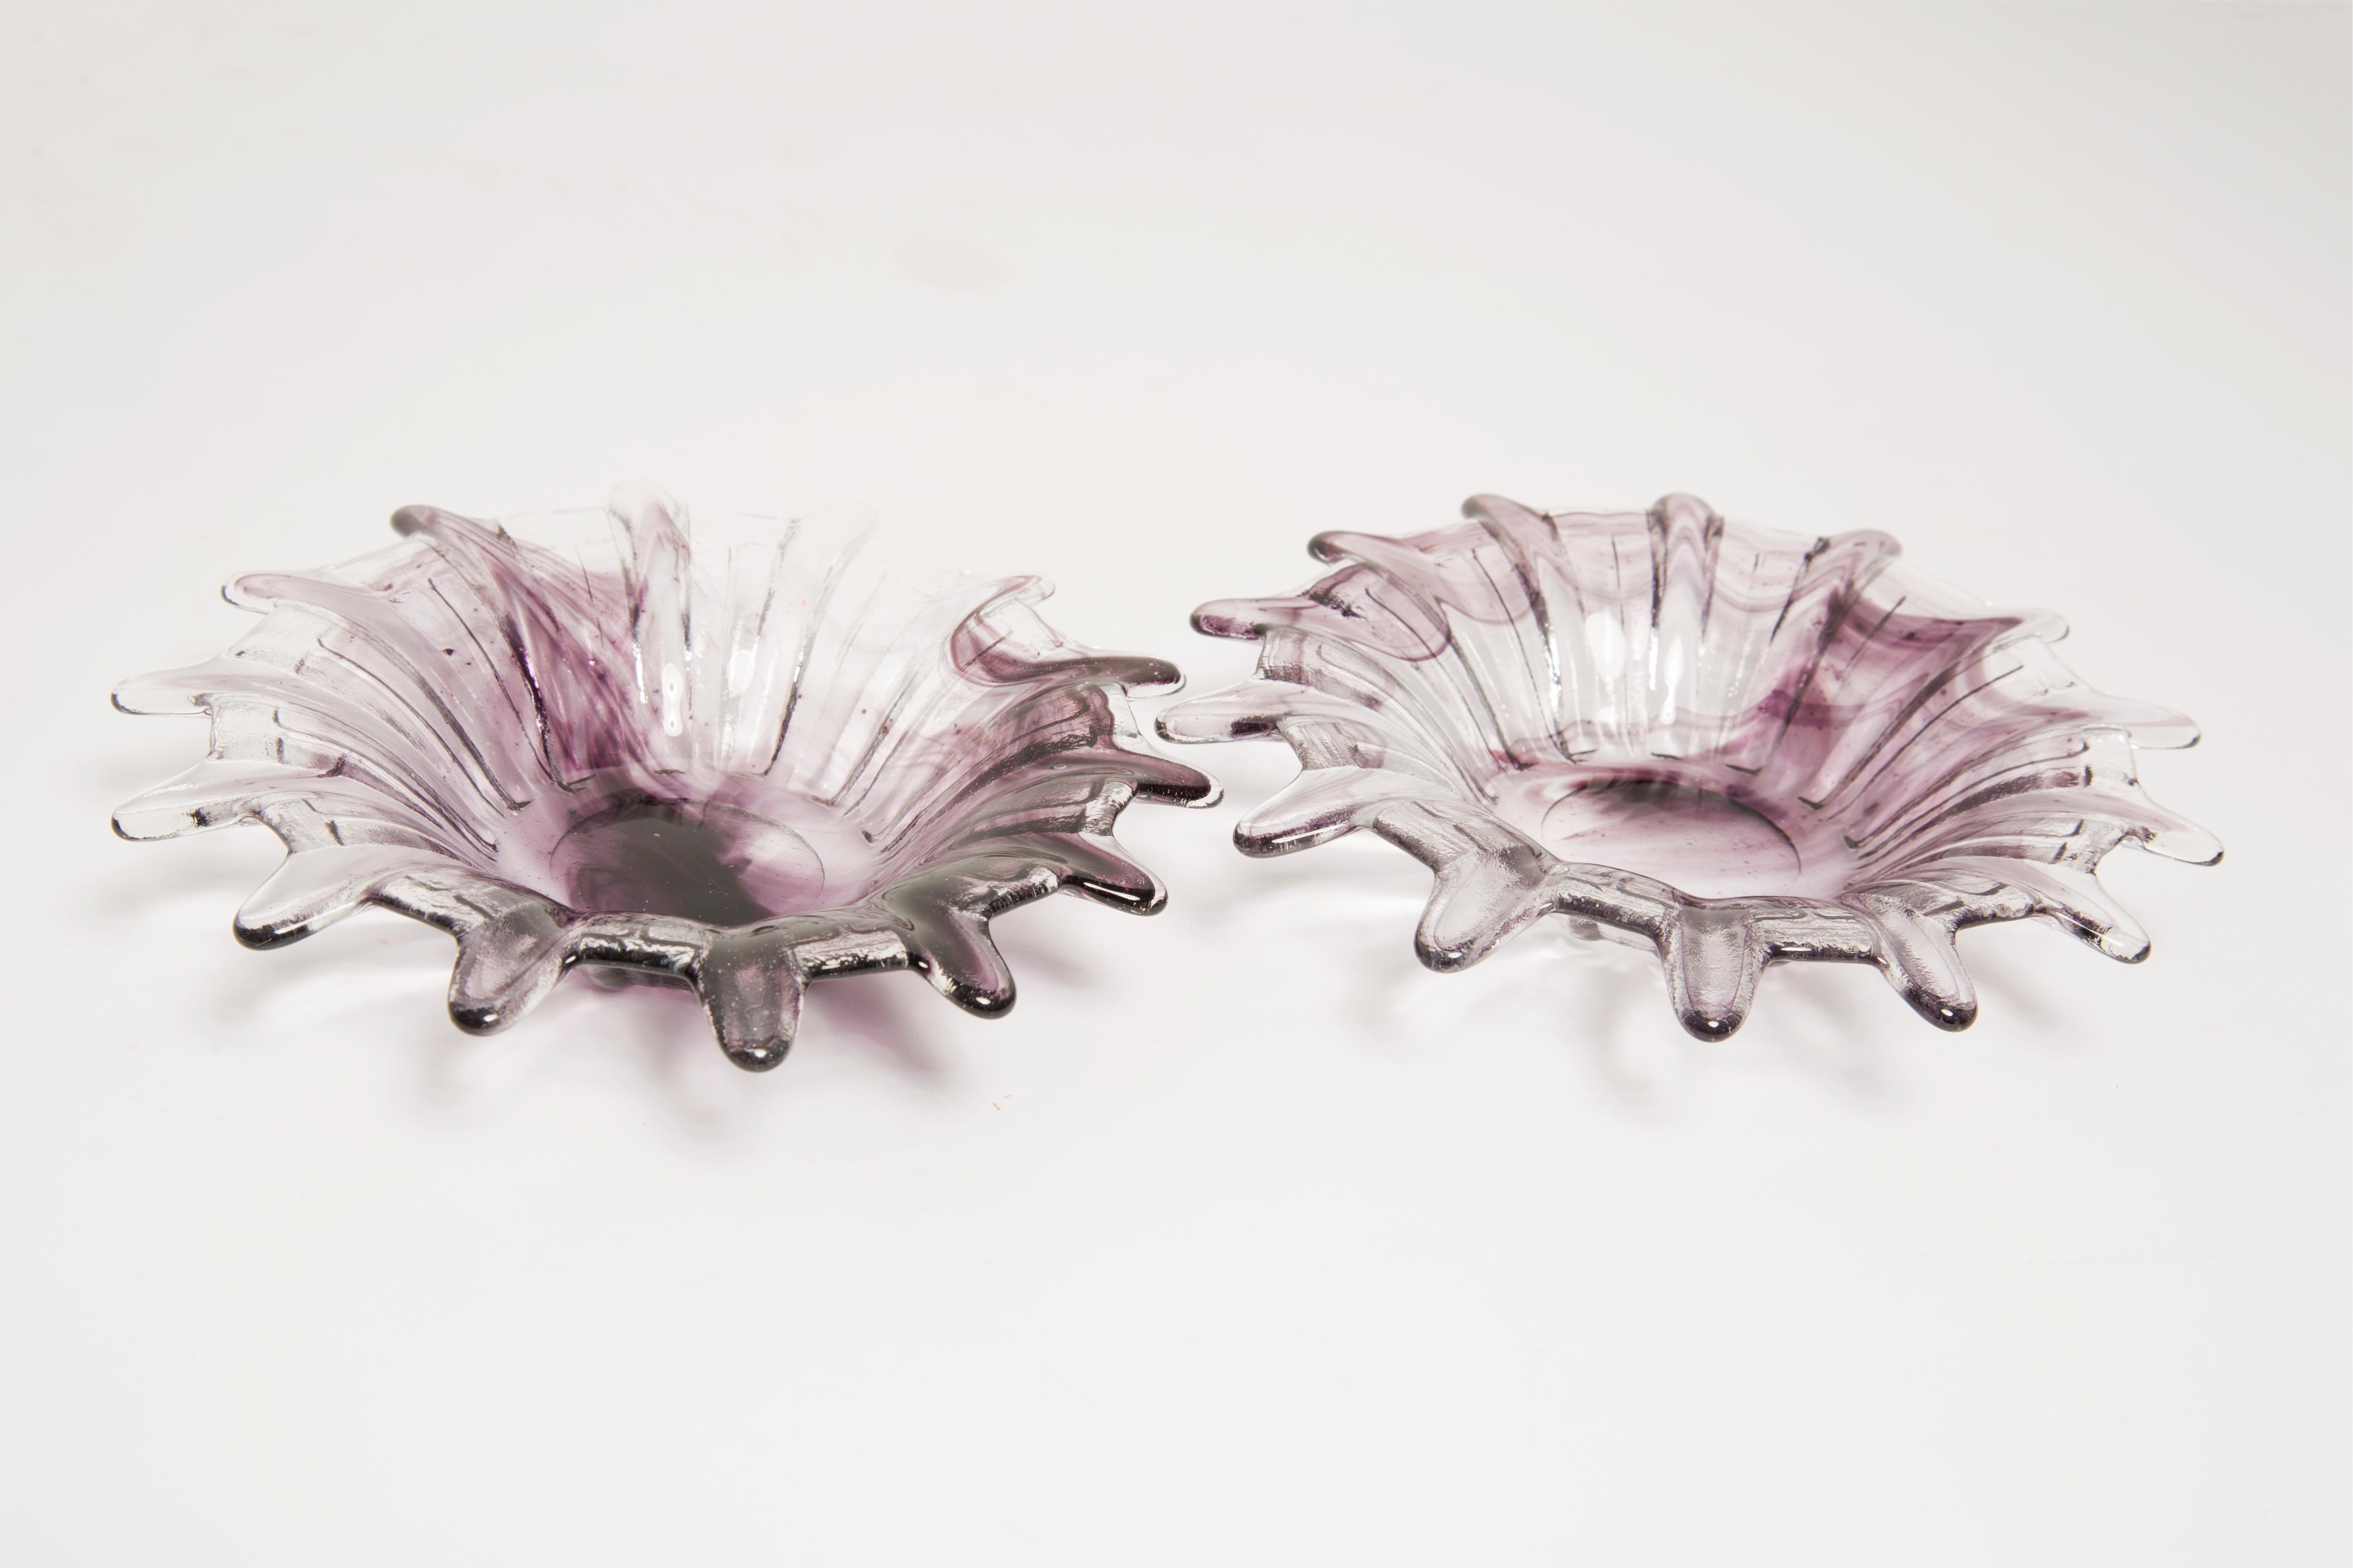 Mid-Century Modern Pair of Vintage Light Purple Decorative Glass Plates, Bowls, Italy, 1960s For Sale